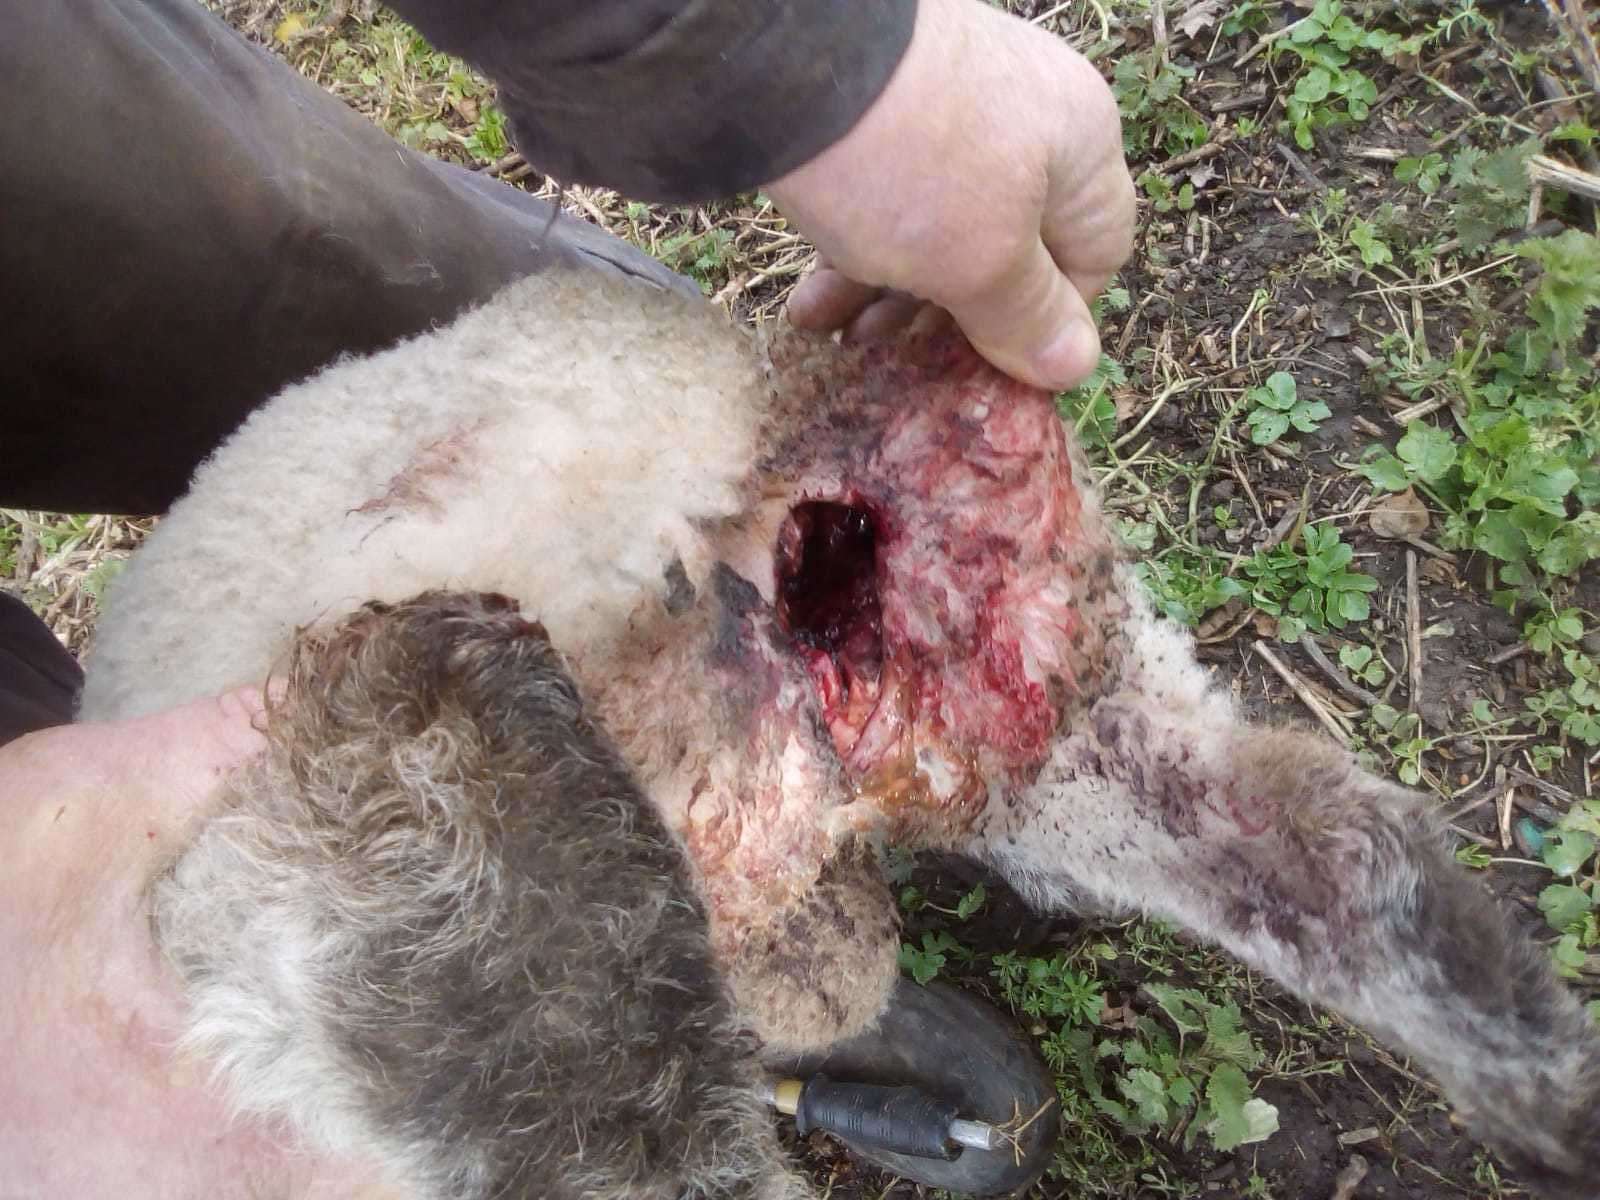 The nasty injury suffered by the lamb after it was attacked by a dog